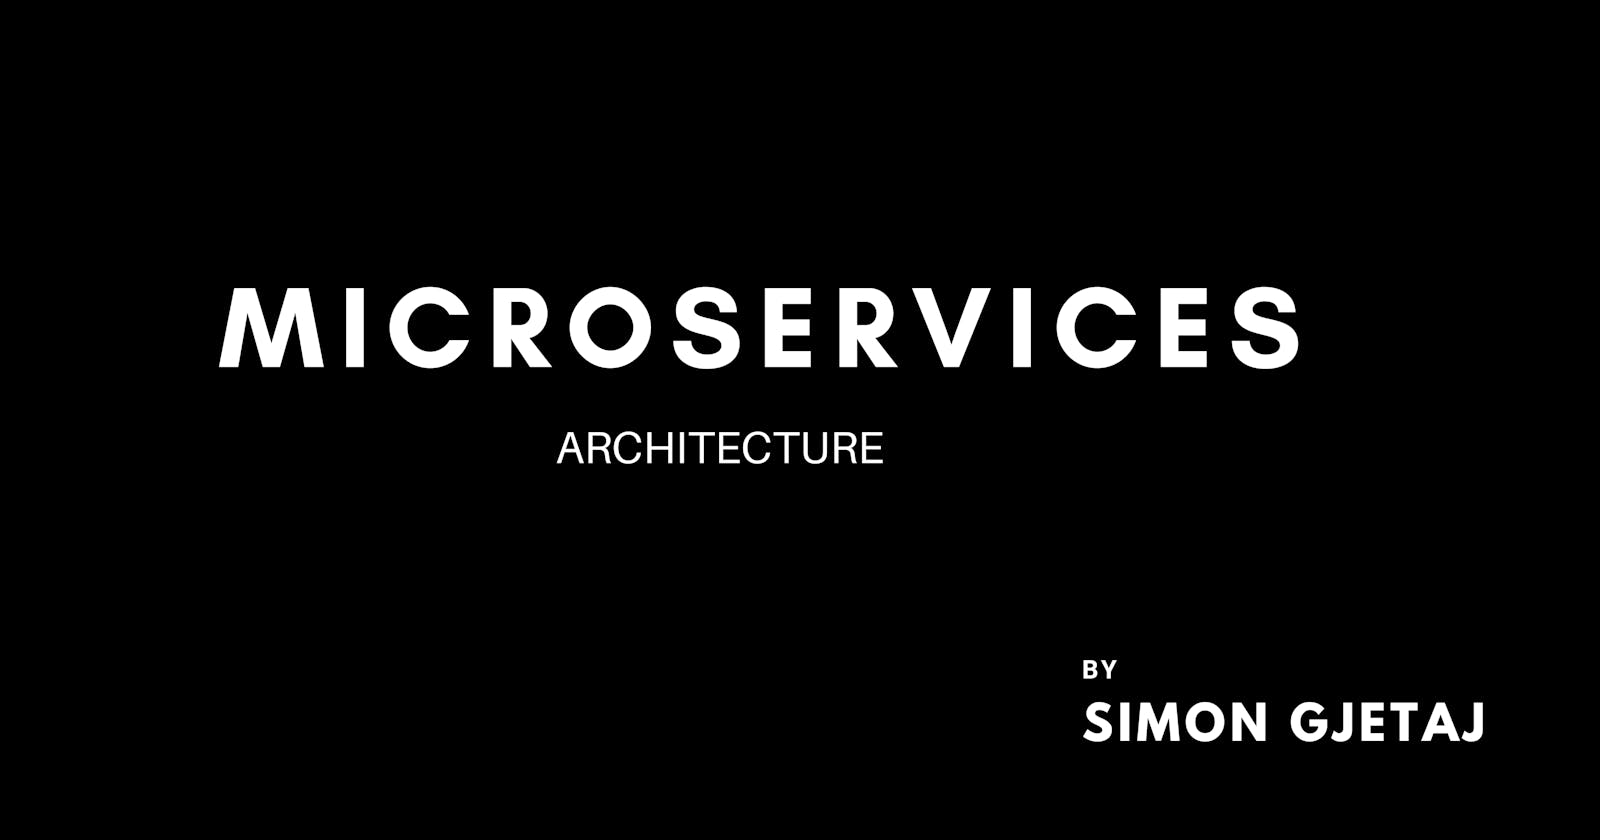 3 min thought on microservices architecture 💭